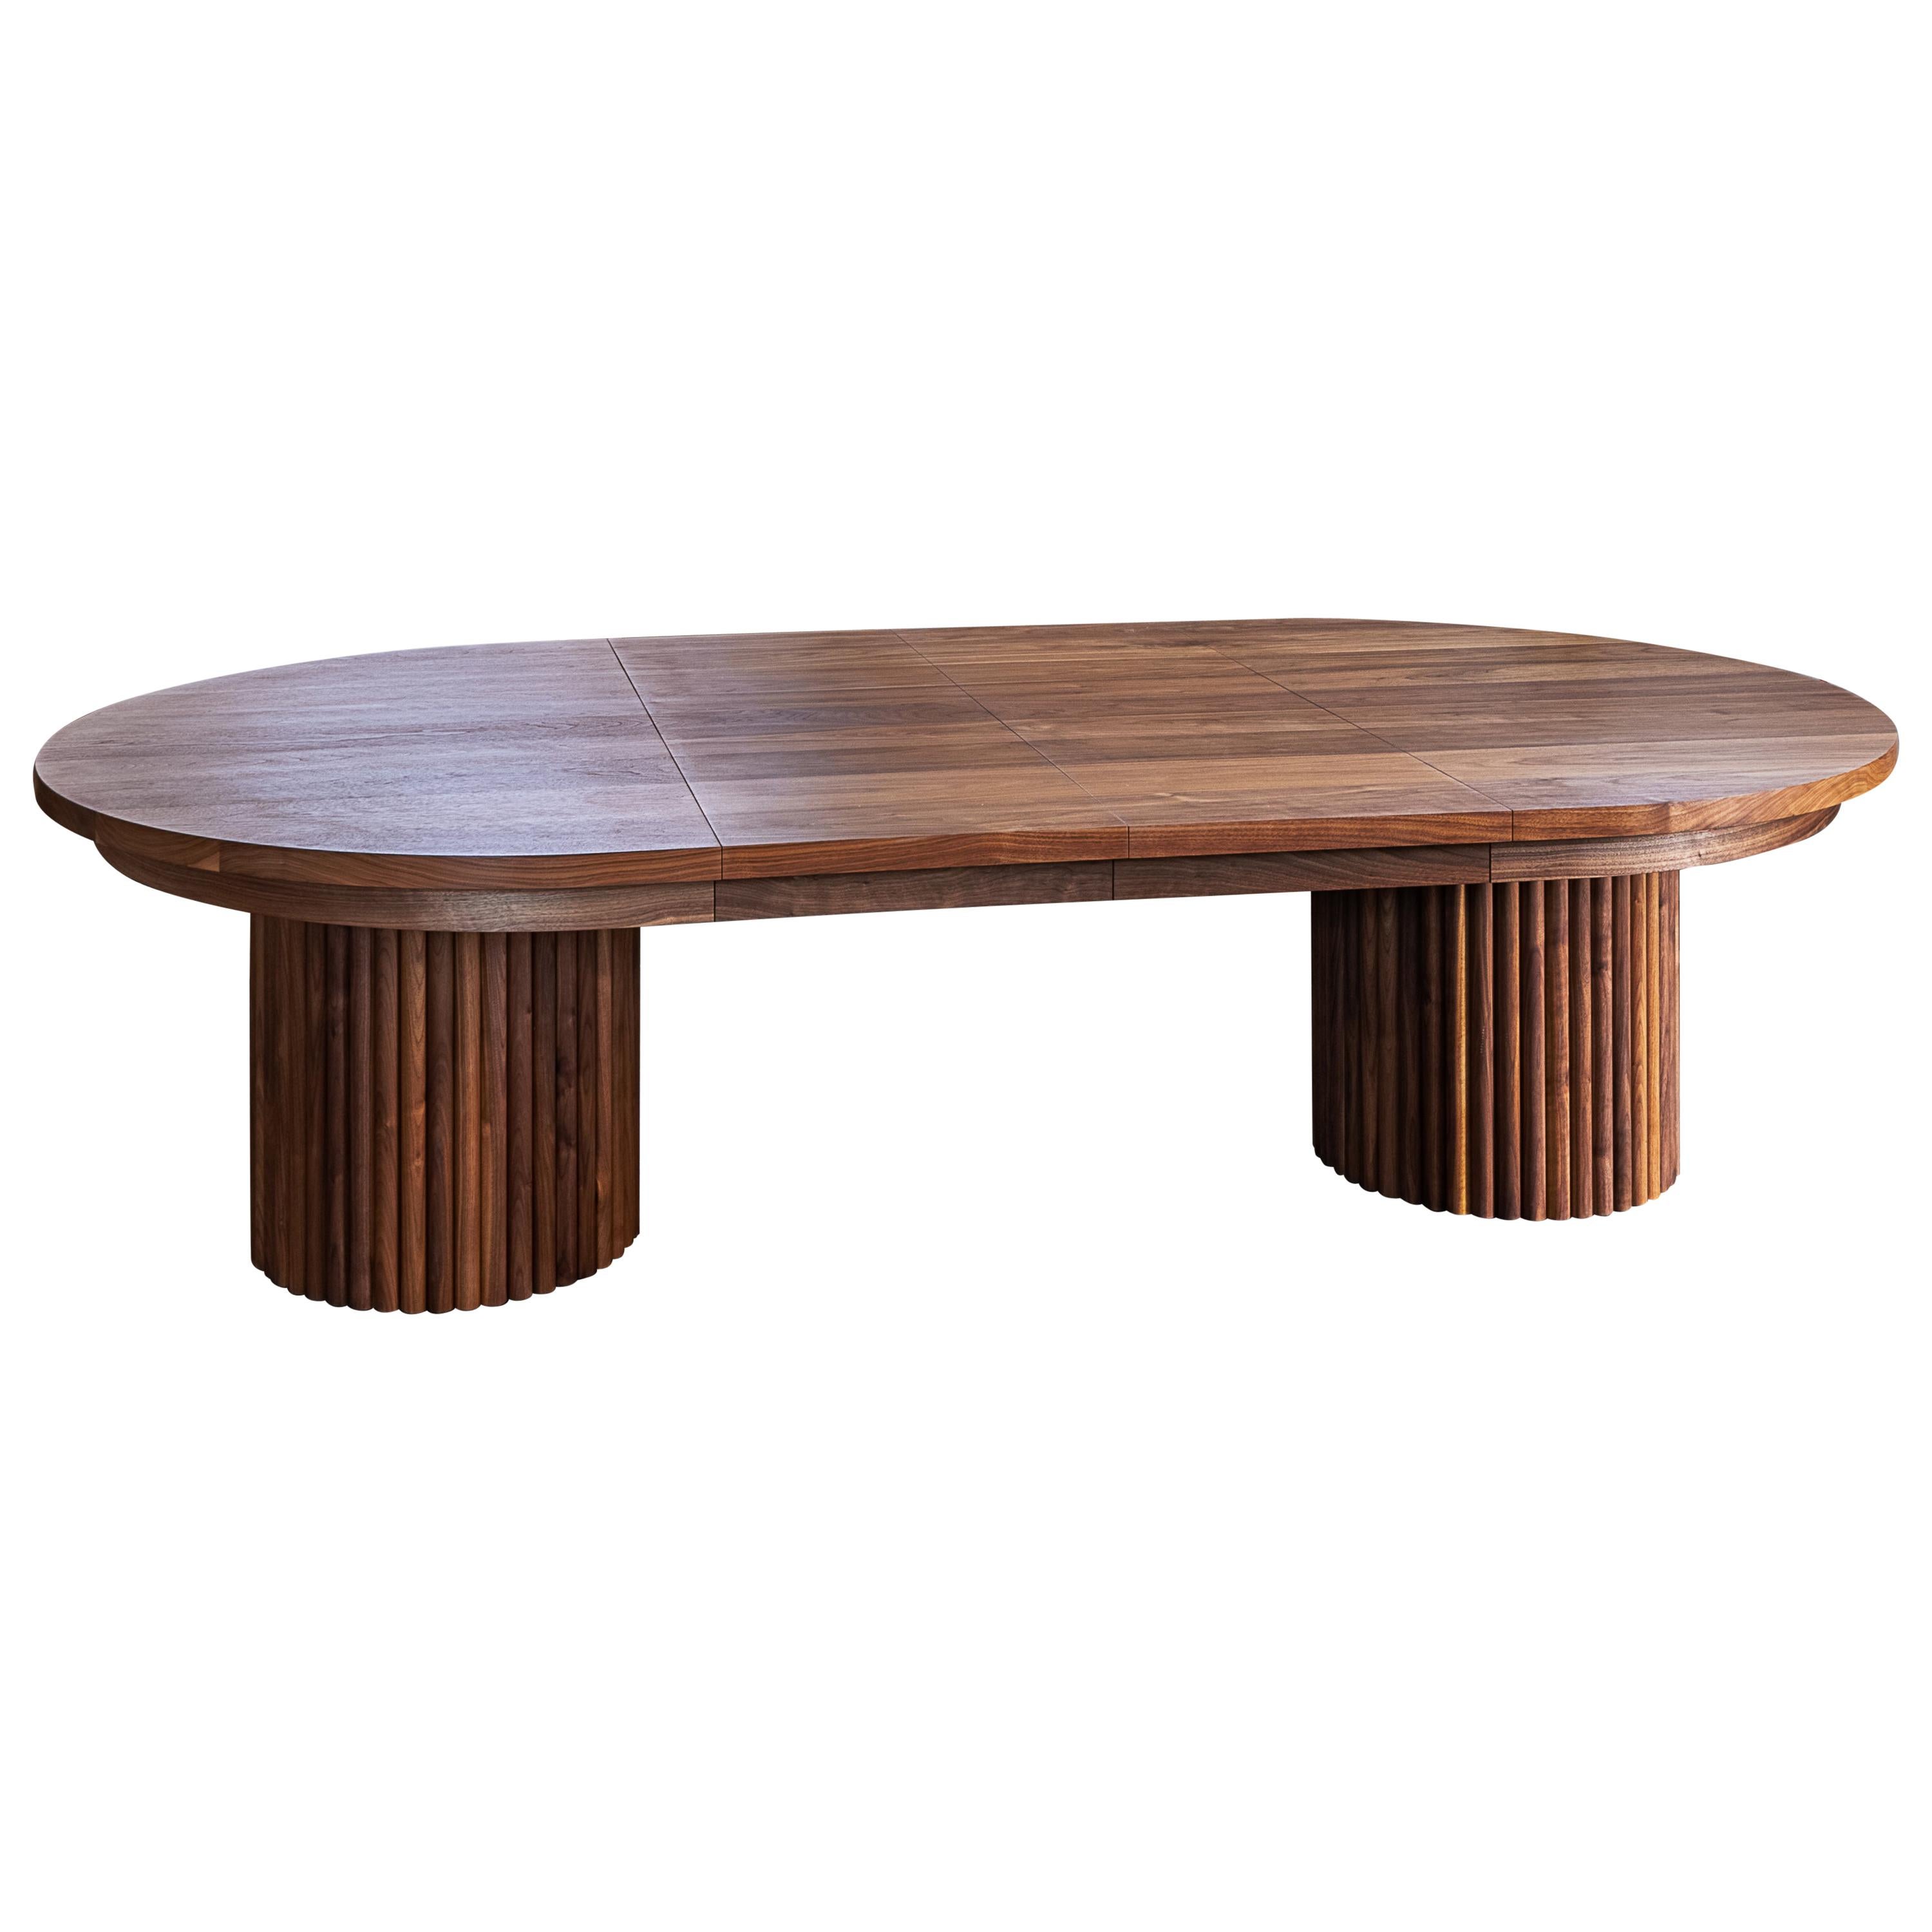 Brutalist Inspired "Marilyn" Dining Table with Adjustable Leaves by Kate Duncan For Sale